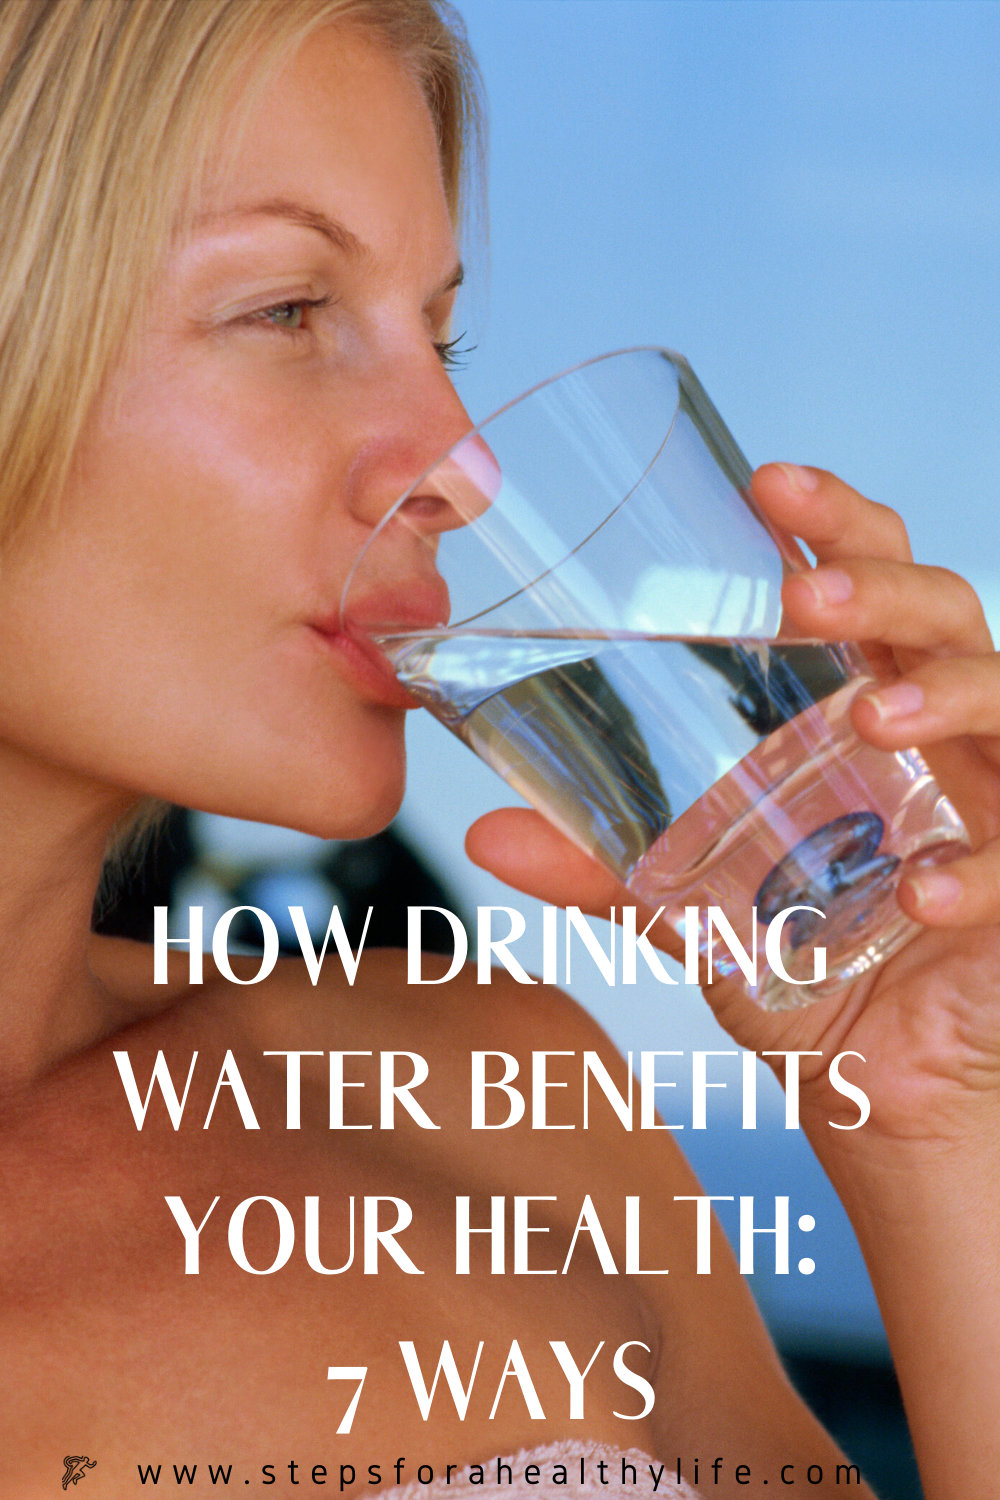 HOW DRINKING WATER BENEFITS YOUR HEALTH: 7 WAYS 